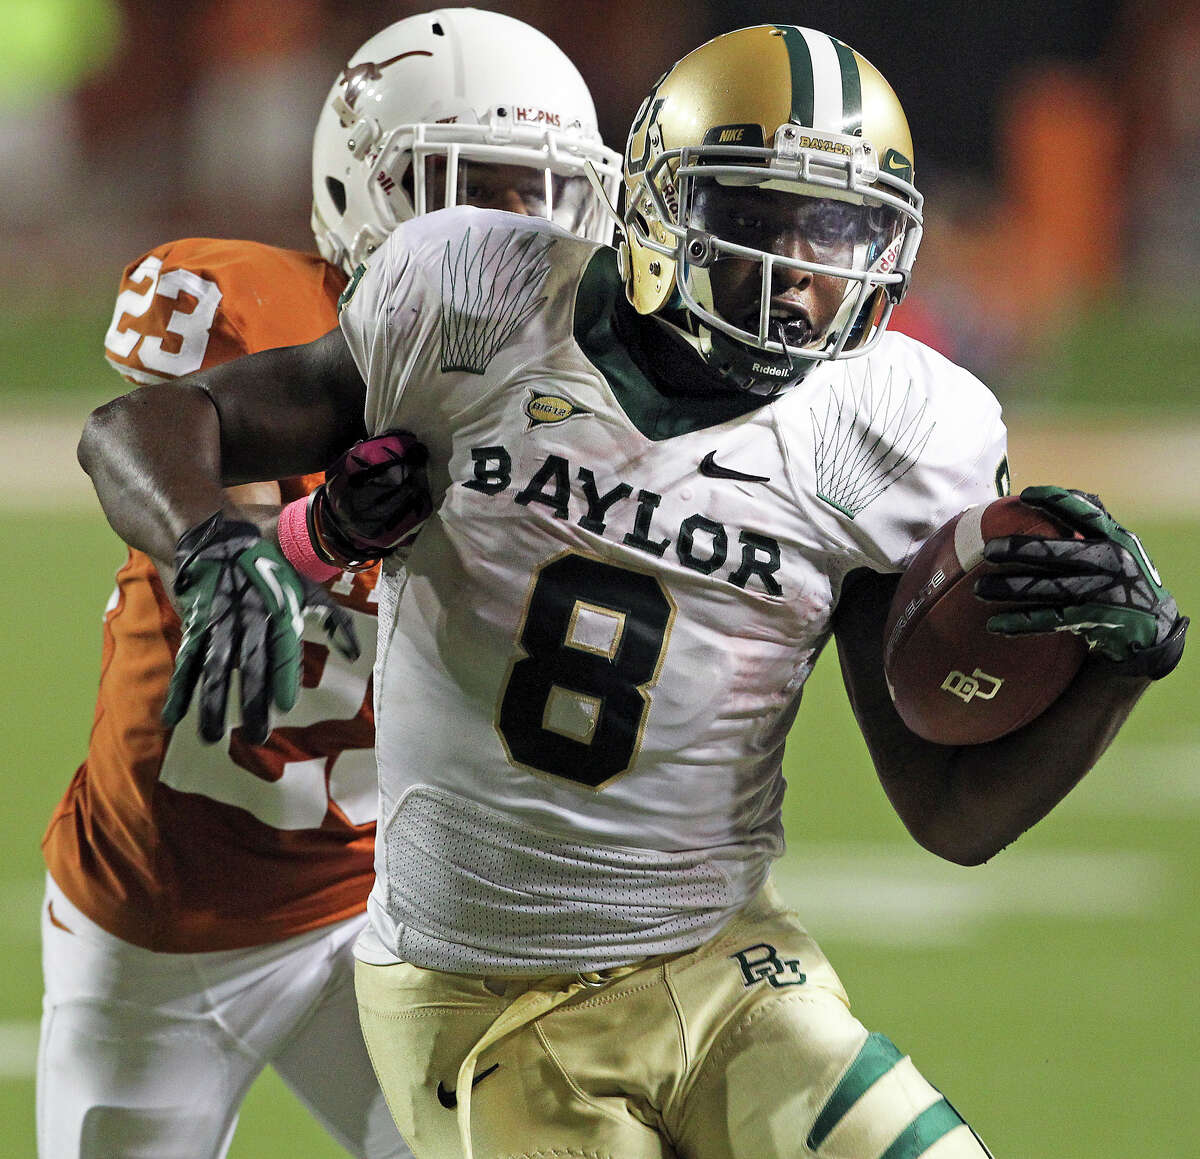 Bears running back Glasco Martin is slowed up by Carrington Byndom in the second half as Texas hosts Baylor at Darrell K Royal - Texas Memorial Stadium Stadium on Oct. 20, 2012.